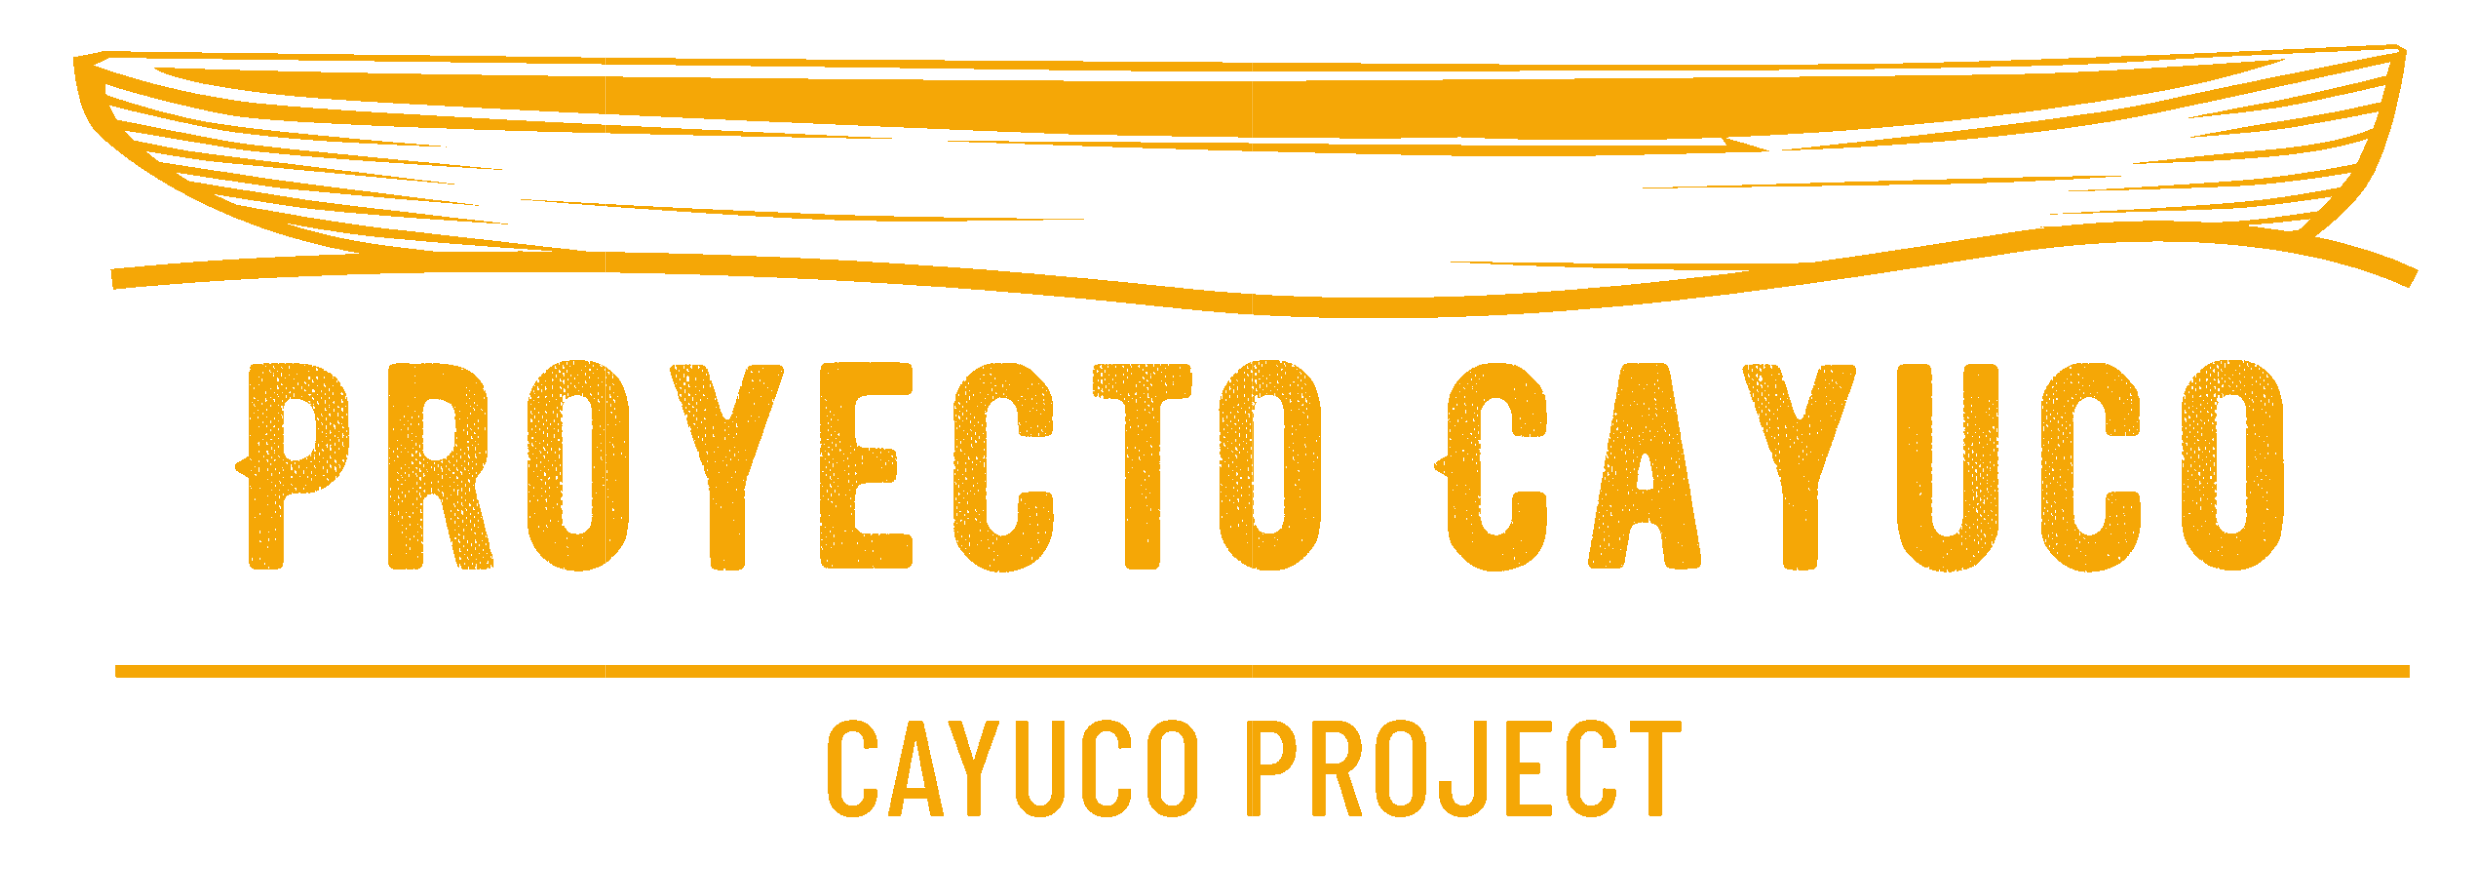 Cayuco Project